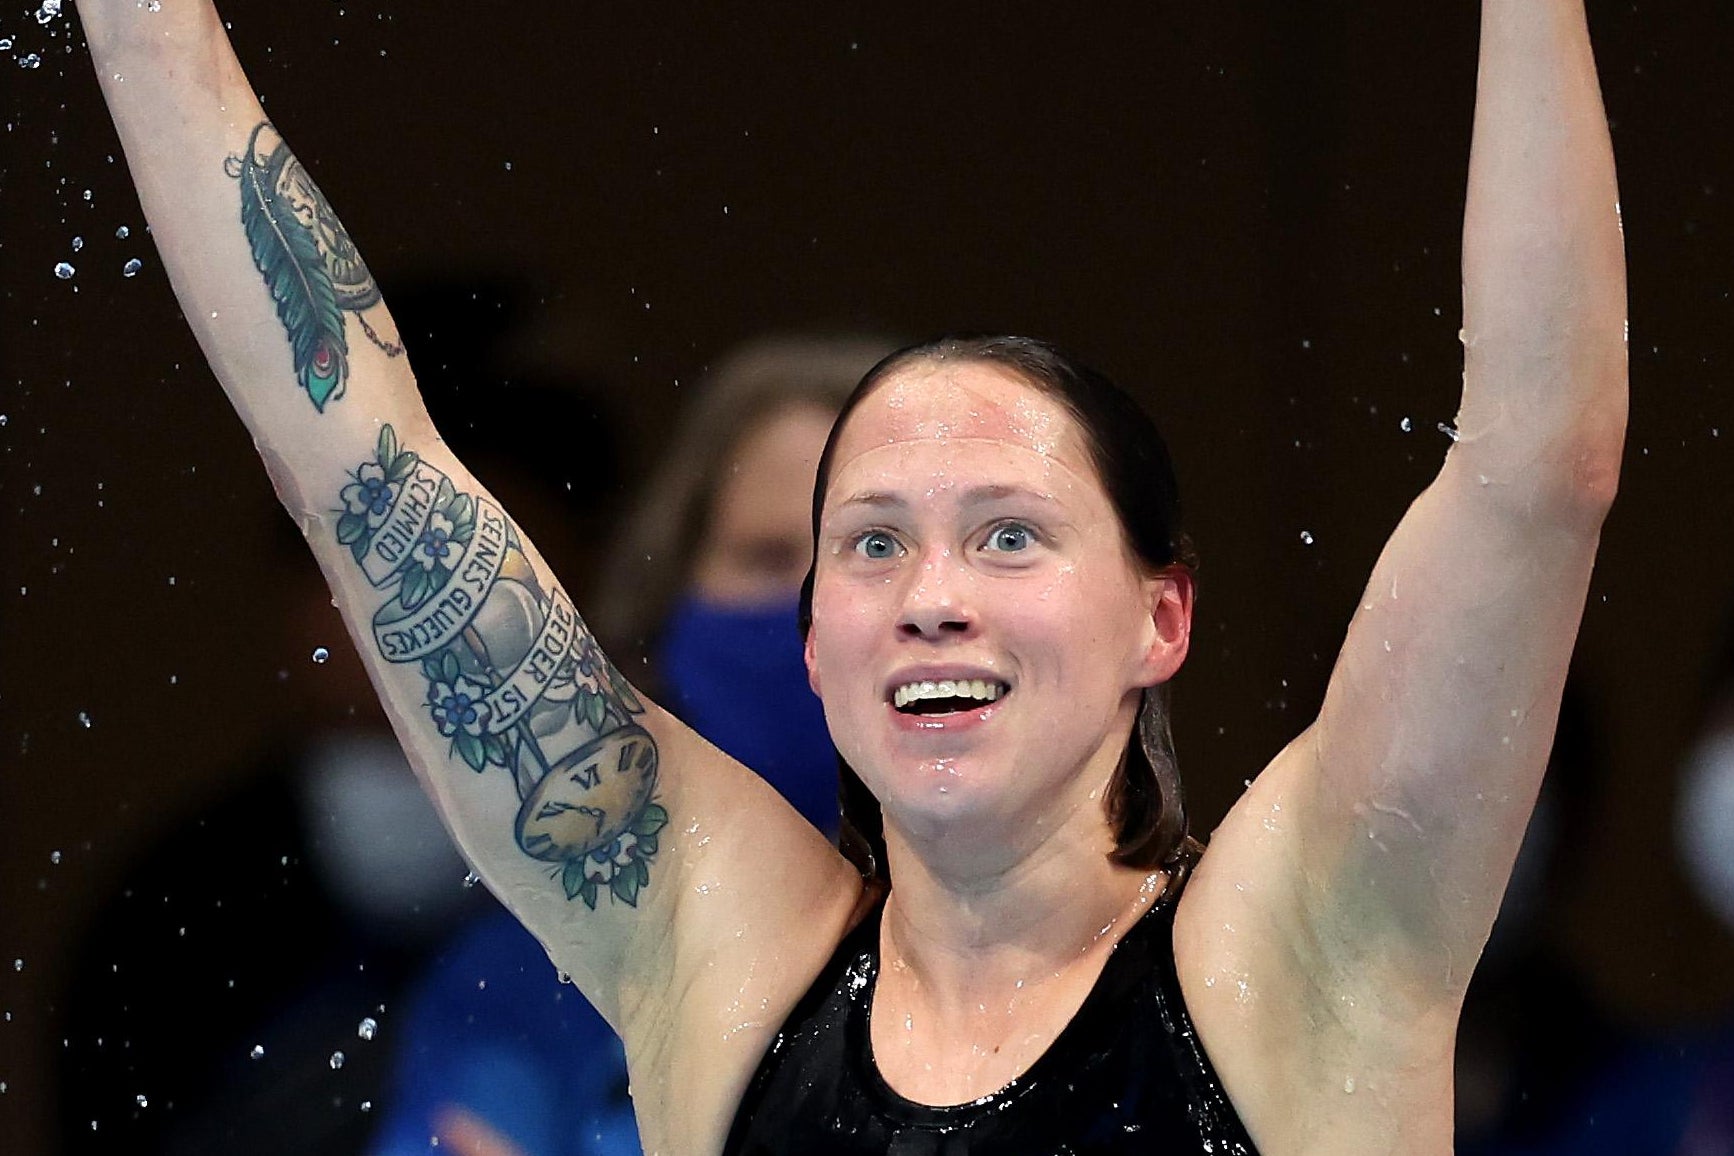 Kohler smiling with her arms raised in her swimsuit, a large tattoo described below visible on her right arm